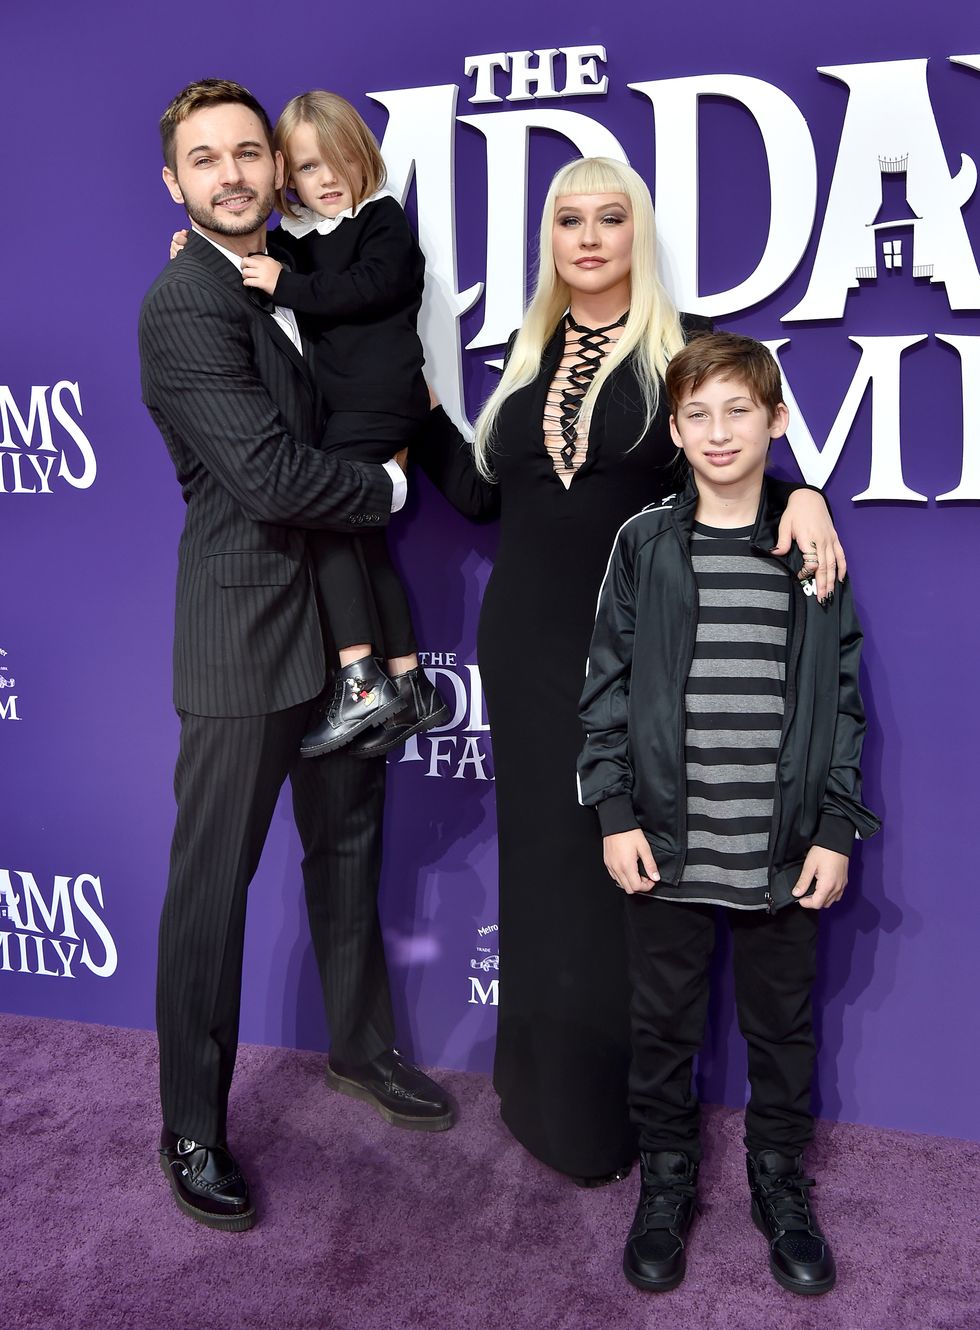 premiere of mgm's "the addams family" arrivals